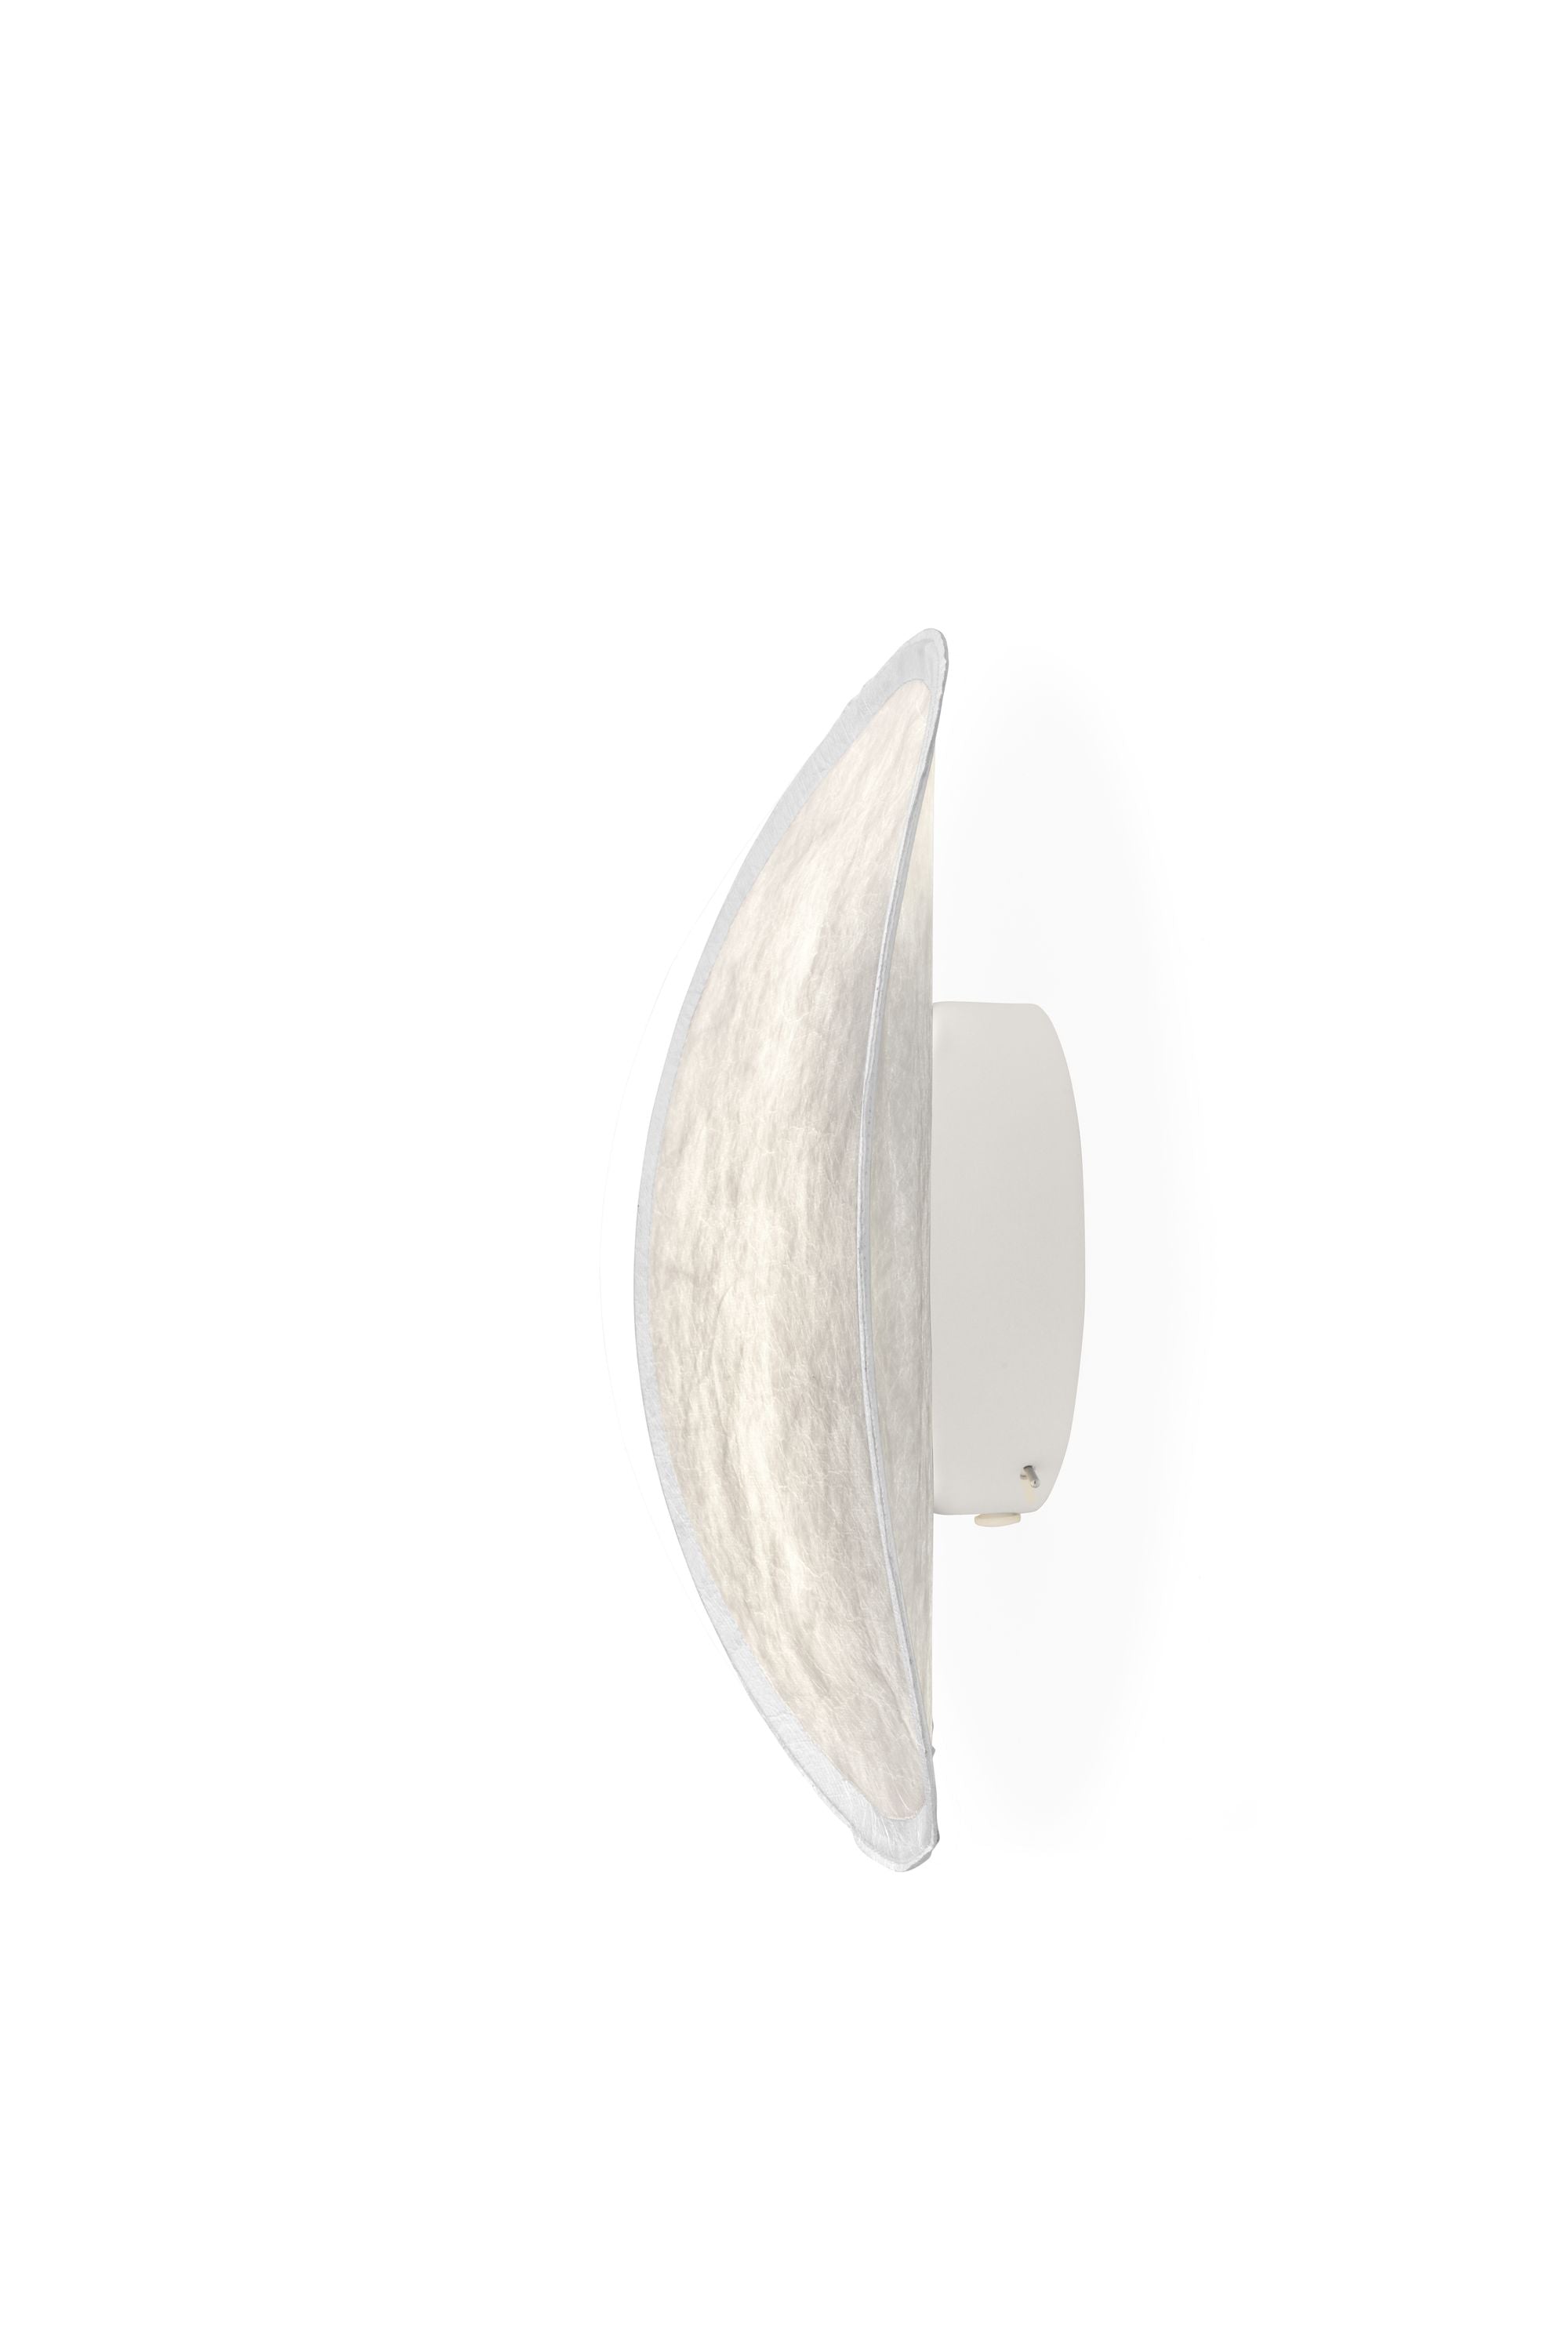 New Works Tense Wall Lamp, White